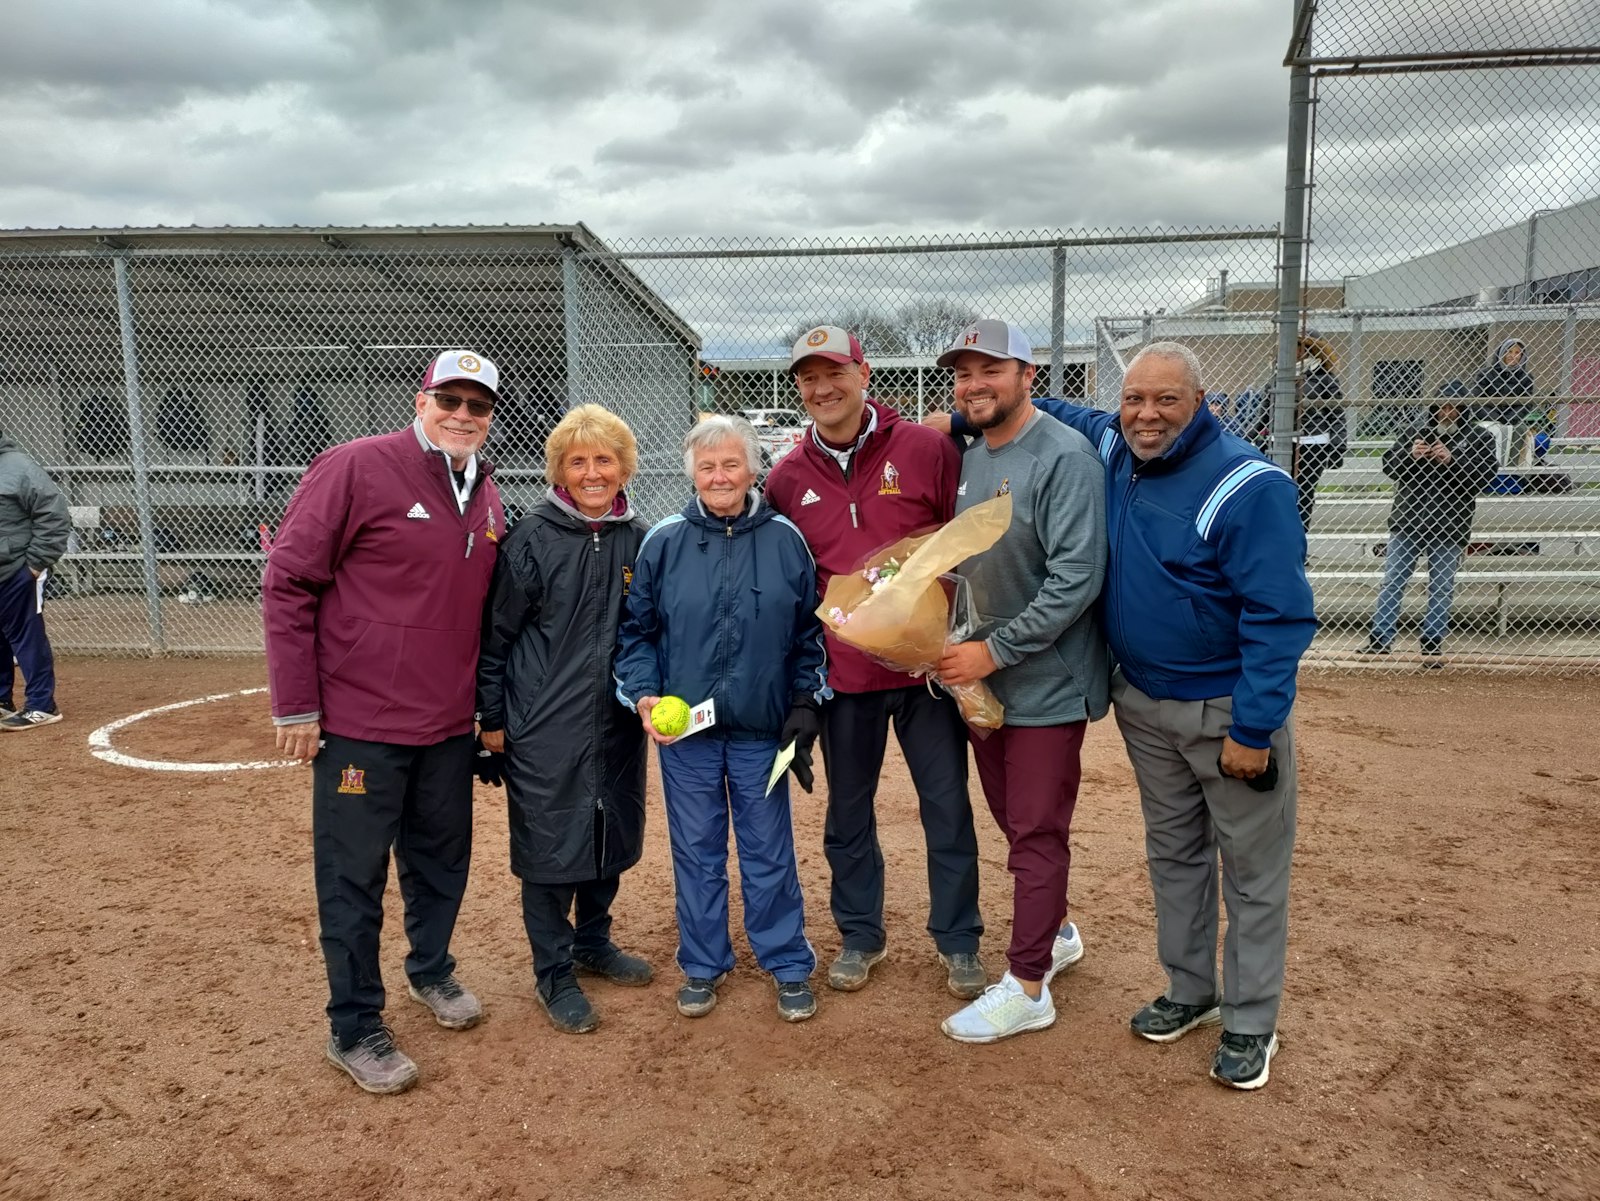 Regina’s legendary athletic director Diane Laffey (in blue jacket) was honored by Mercy officials marking her retirement this spring after 60 years. Participating in the tribute were Jerry Ashe (left), Mercy assistant softball coach, Nancy Malinowski, who retired last year after 42 years as Mercy AD, Mercy softball coach Corey Burras, Mercy AD Brandon Malinowski, and CHSL Hall of Fame umpire Jim Briggs.